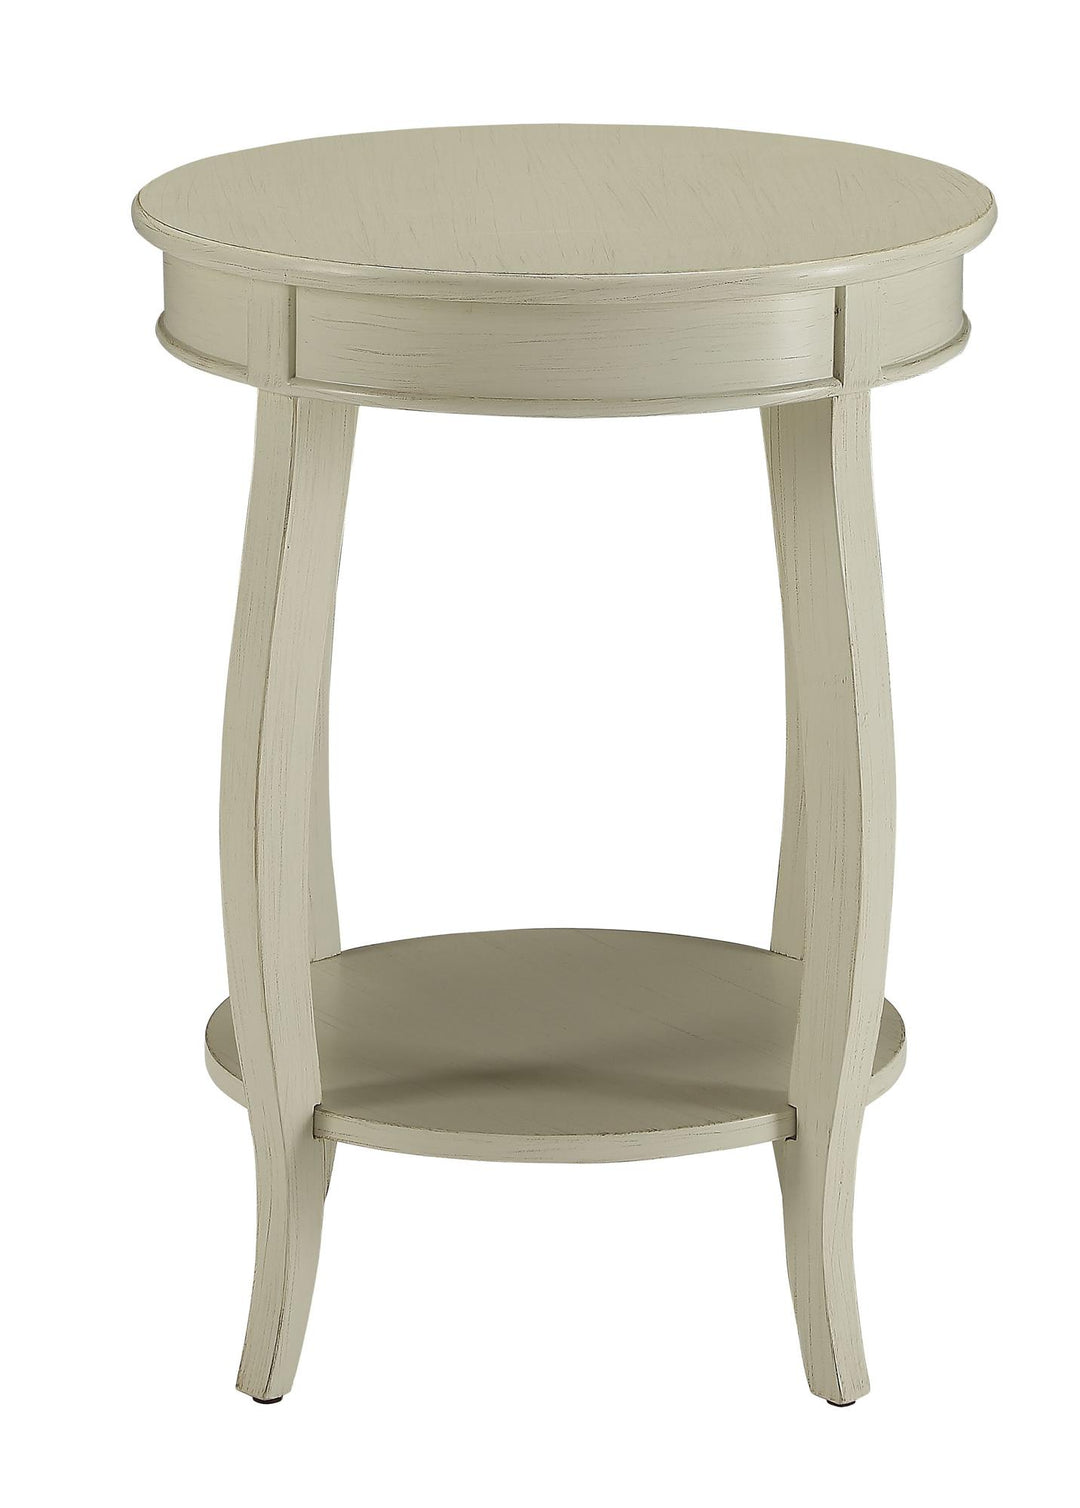 Round Top Accent Table - Antique White